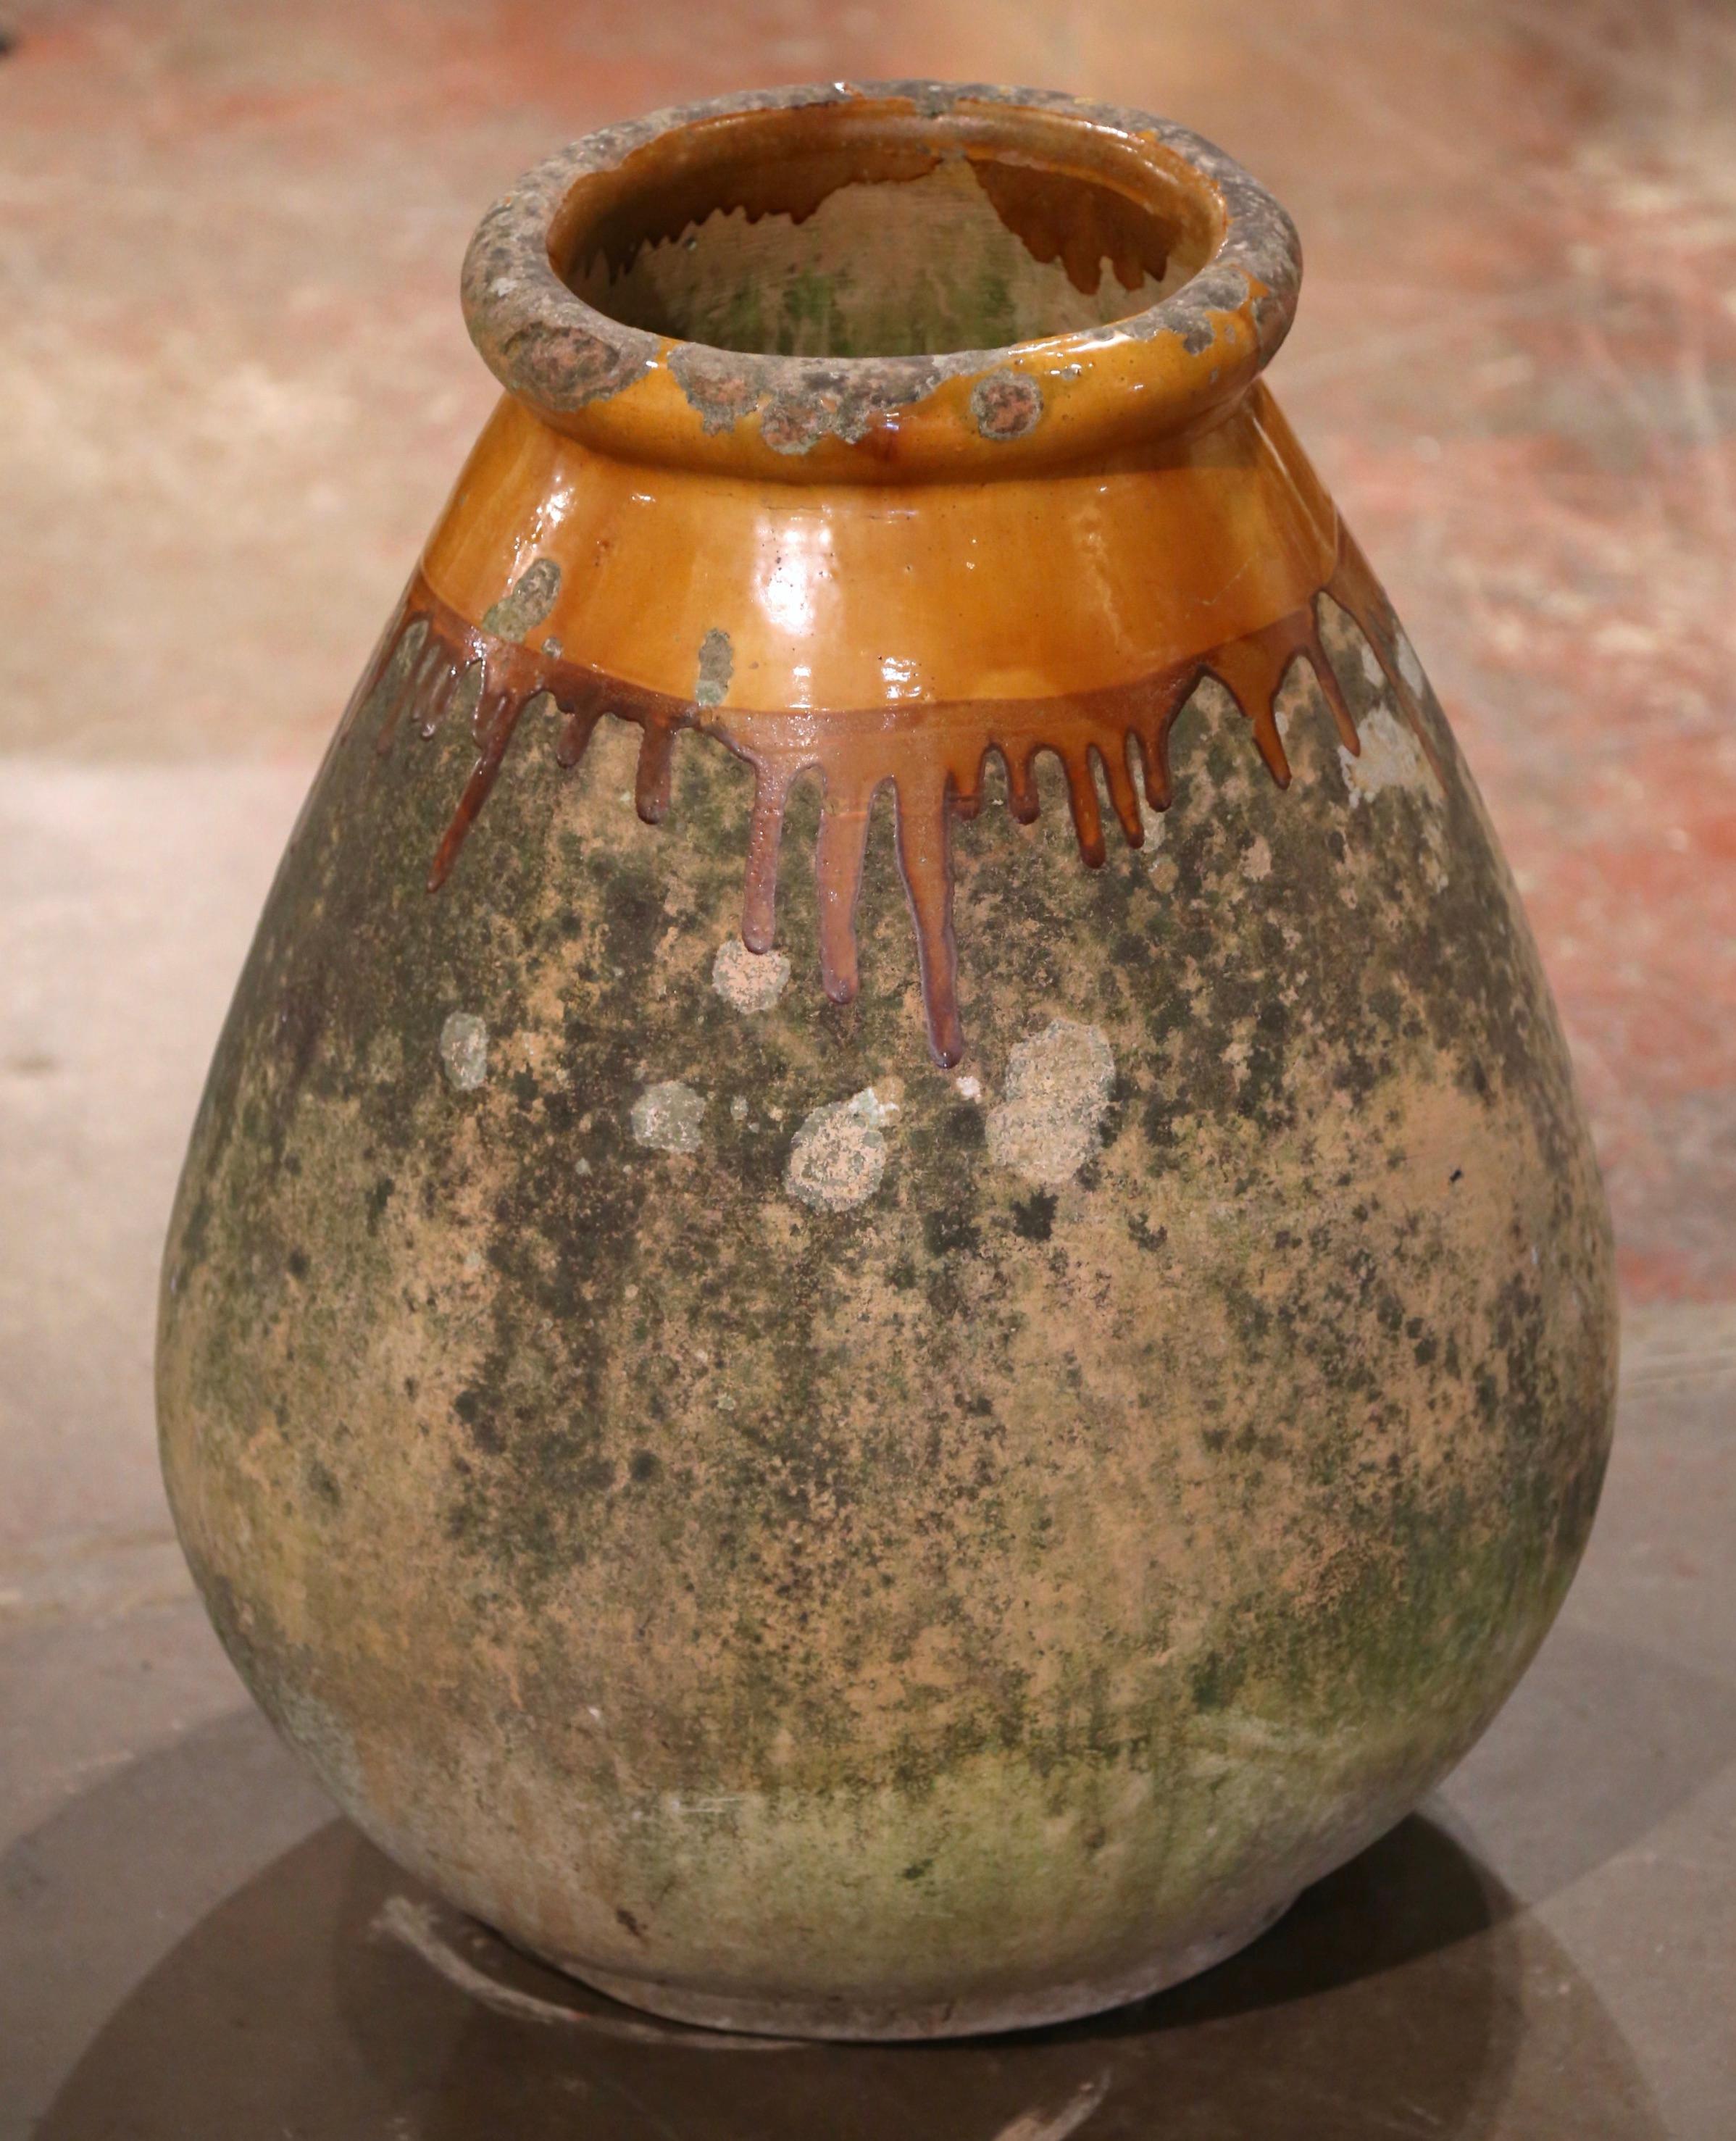 This large, antique earthenware olive jar was created in Biot, Southern France, circa 1760. Made of blond clay and neutral in color, the terracotta vase has a traditional round bulbous shape. The rustic, time-worn pot features a orange ochre glaze